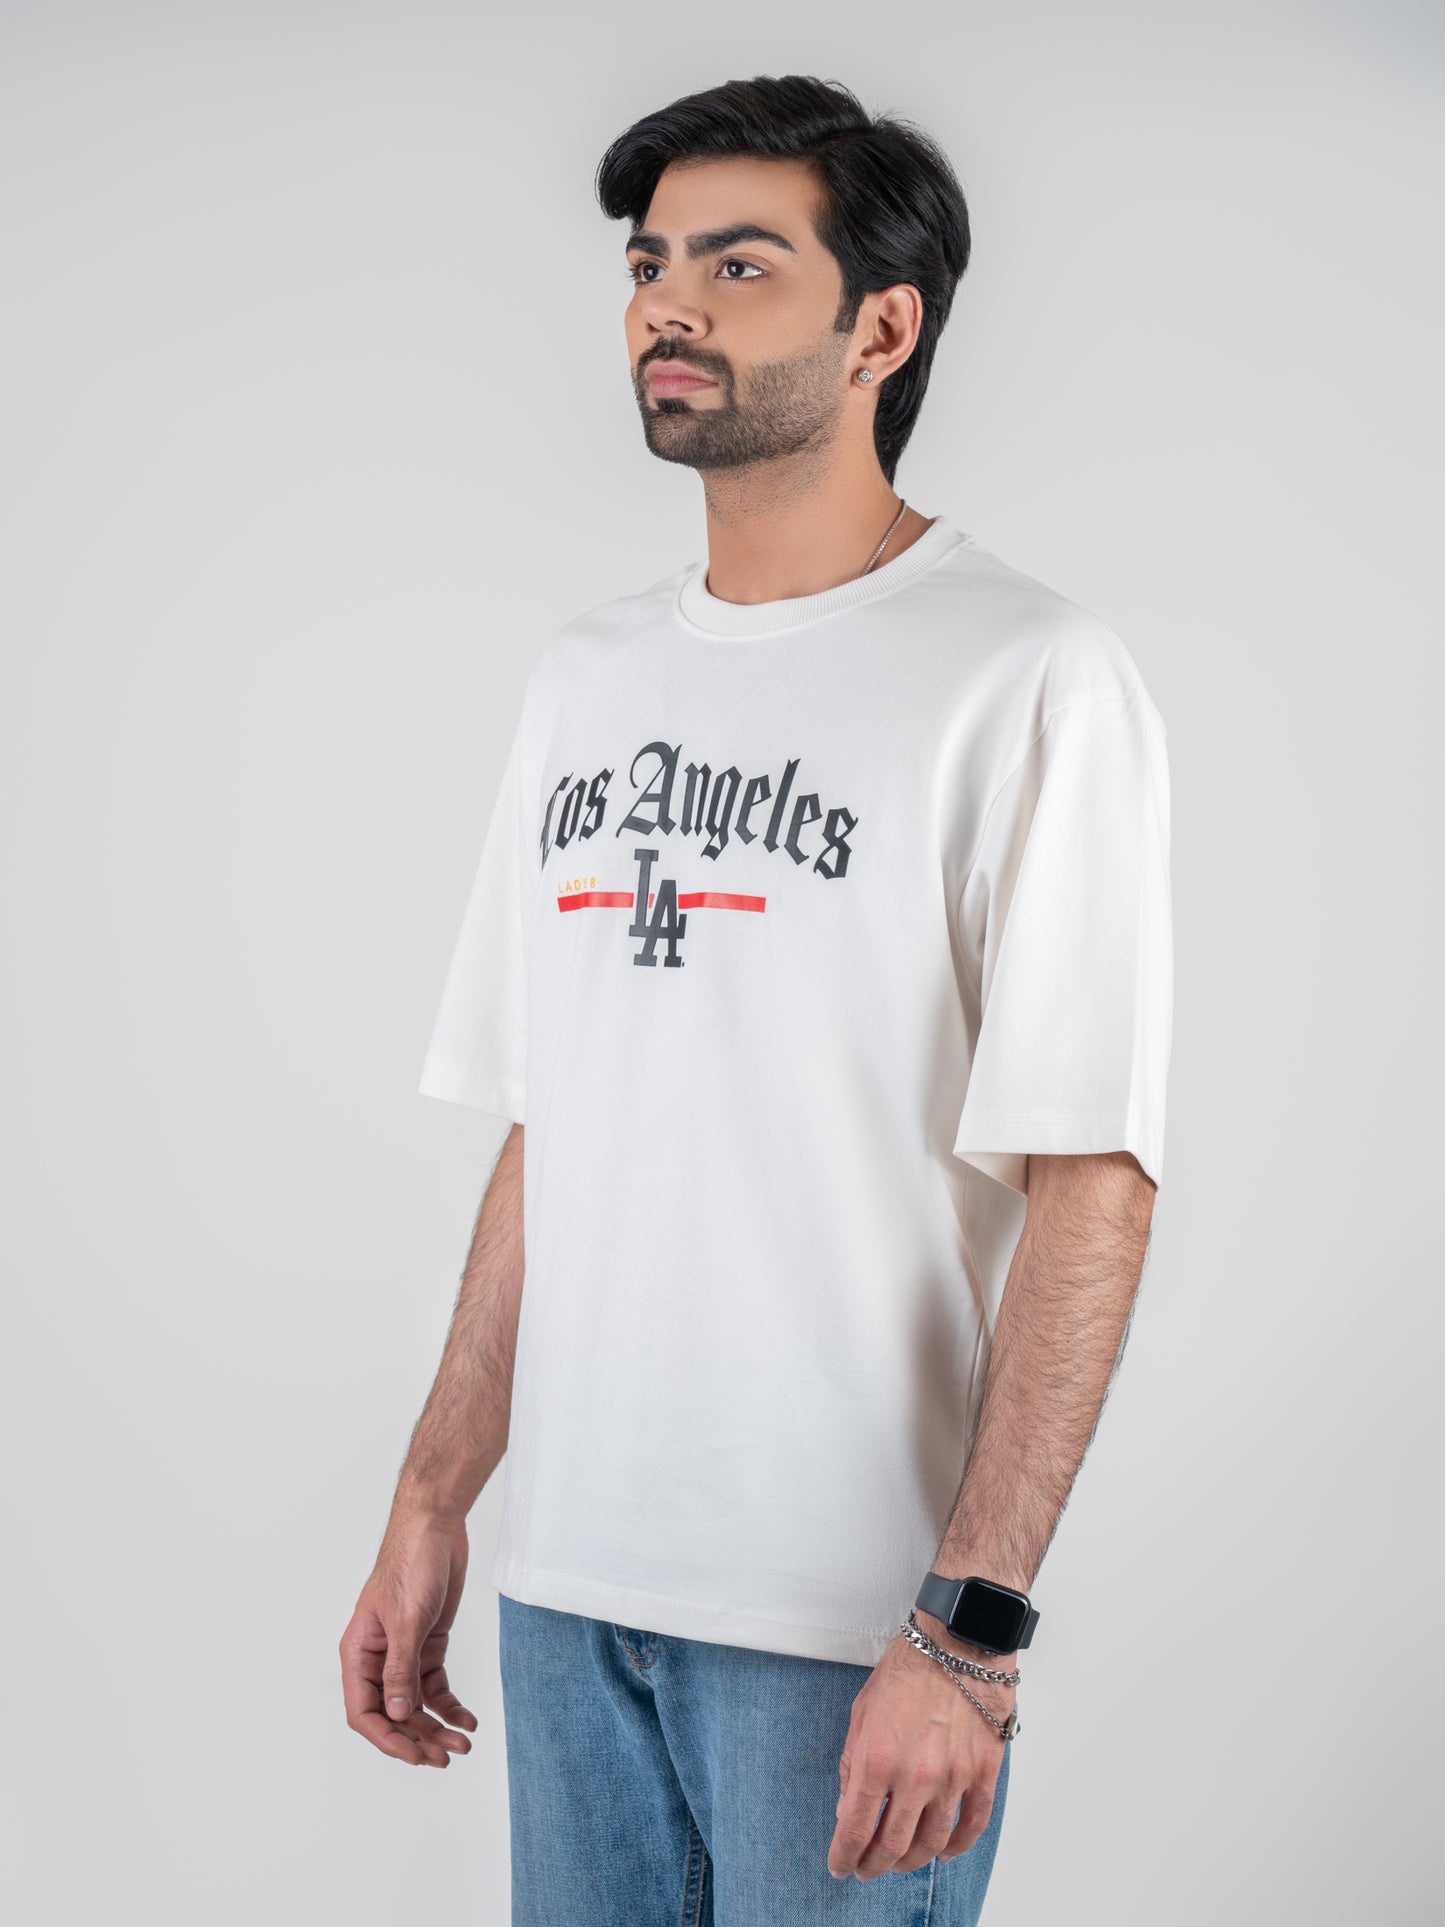 Los Angeles Printed Cotton Oversized Tshirt For Men